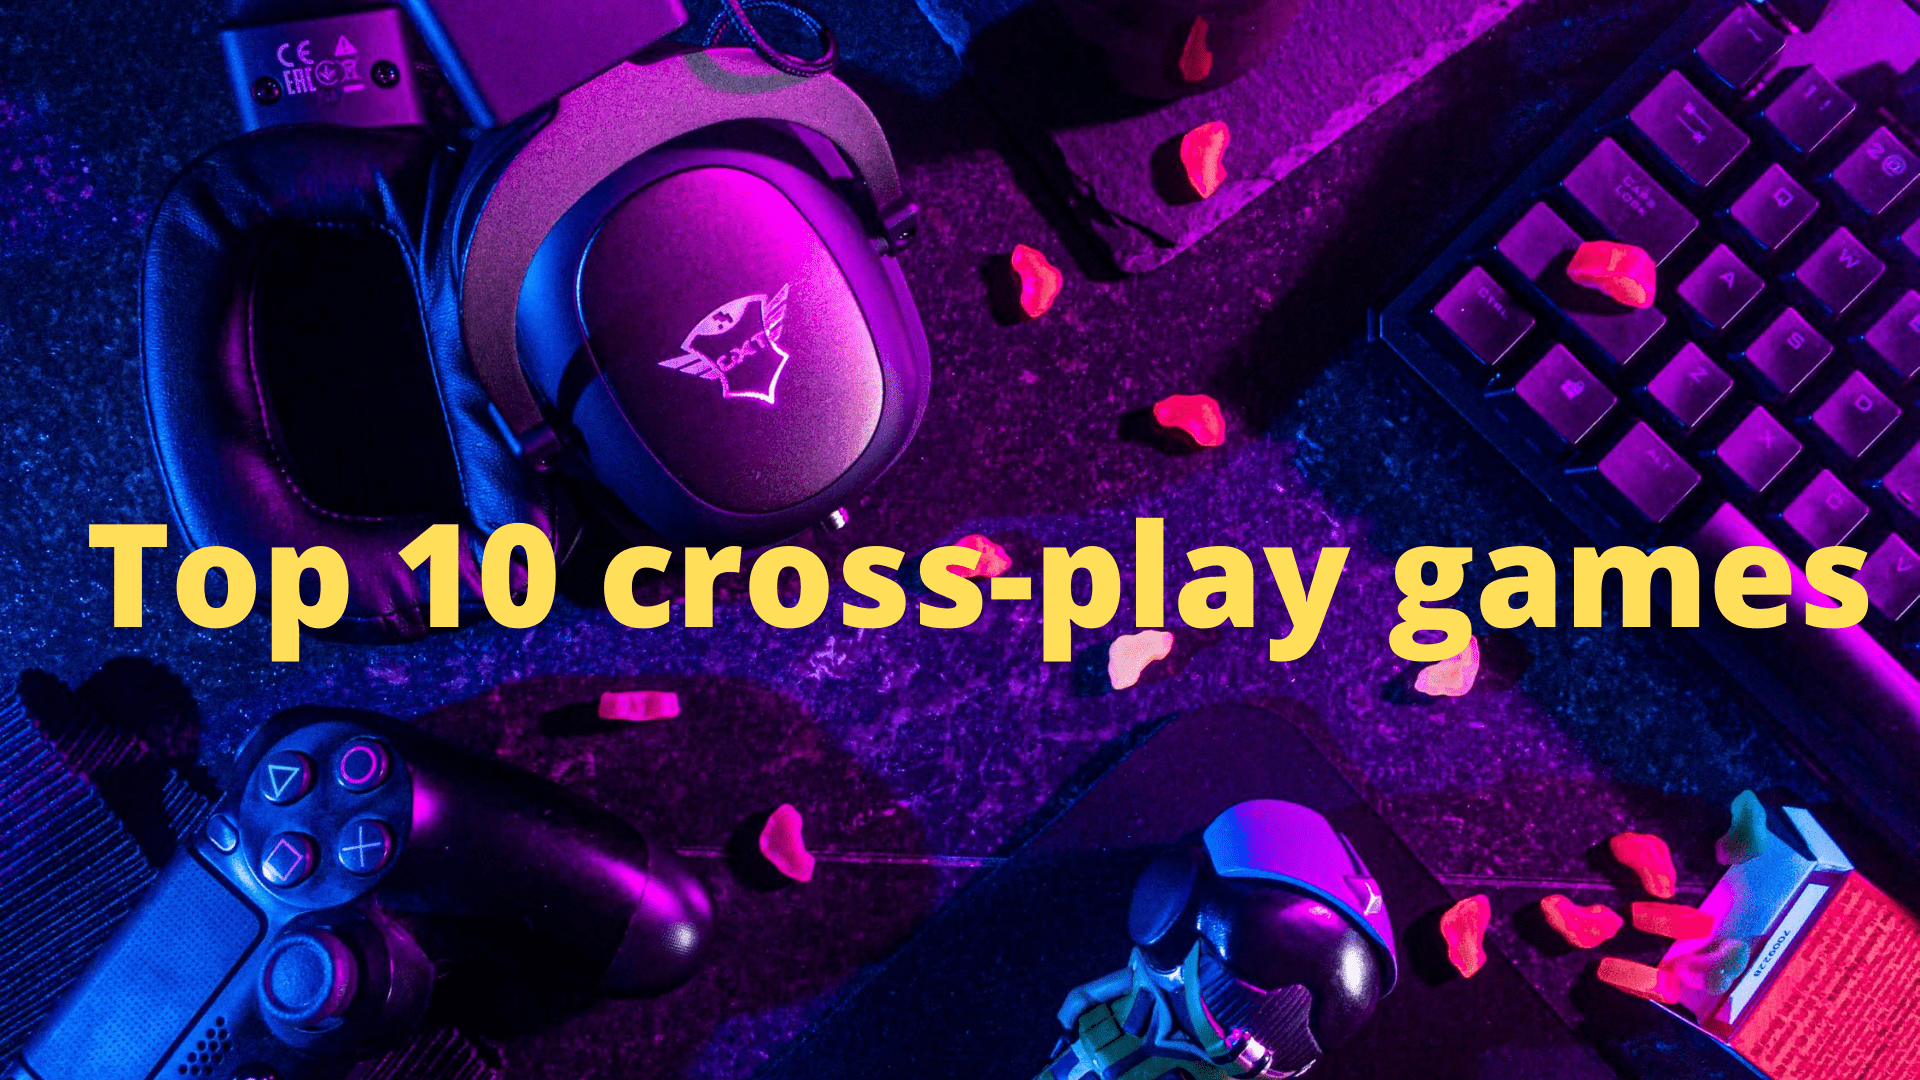 Top 10 cross-play games to play on PS4, Xbox One, PC and Nintendo Switch